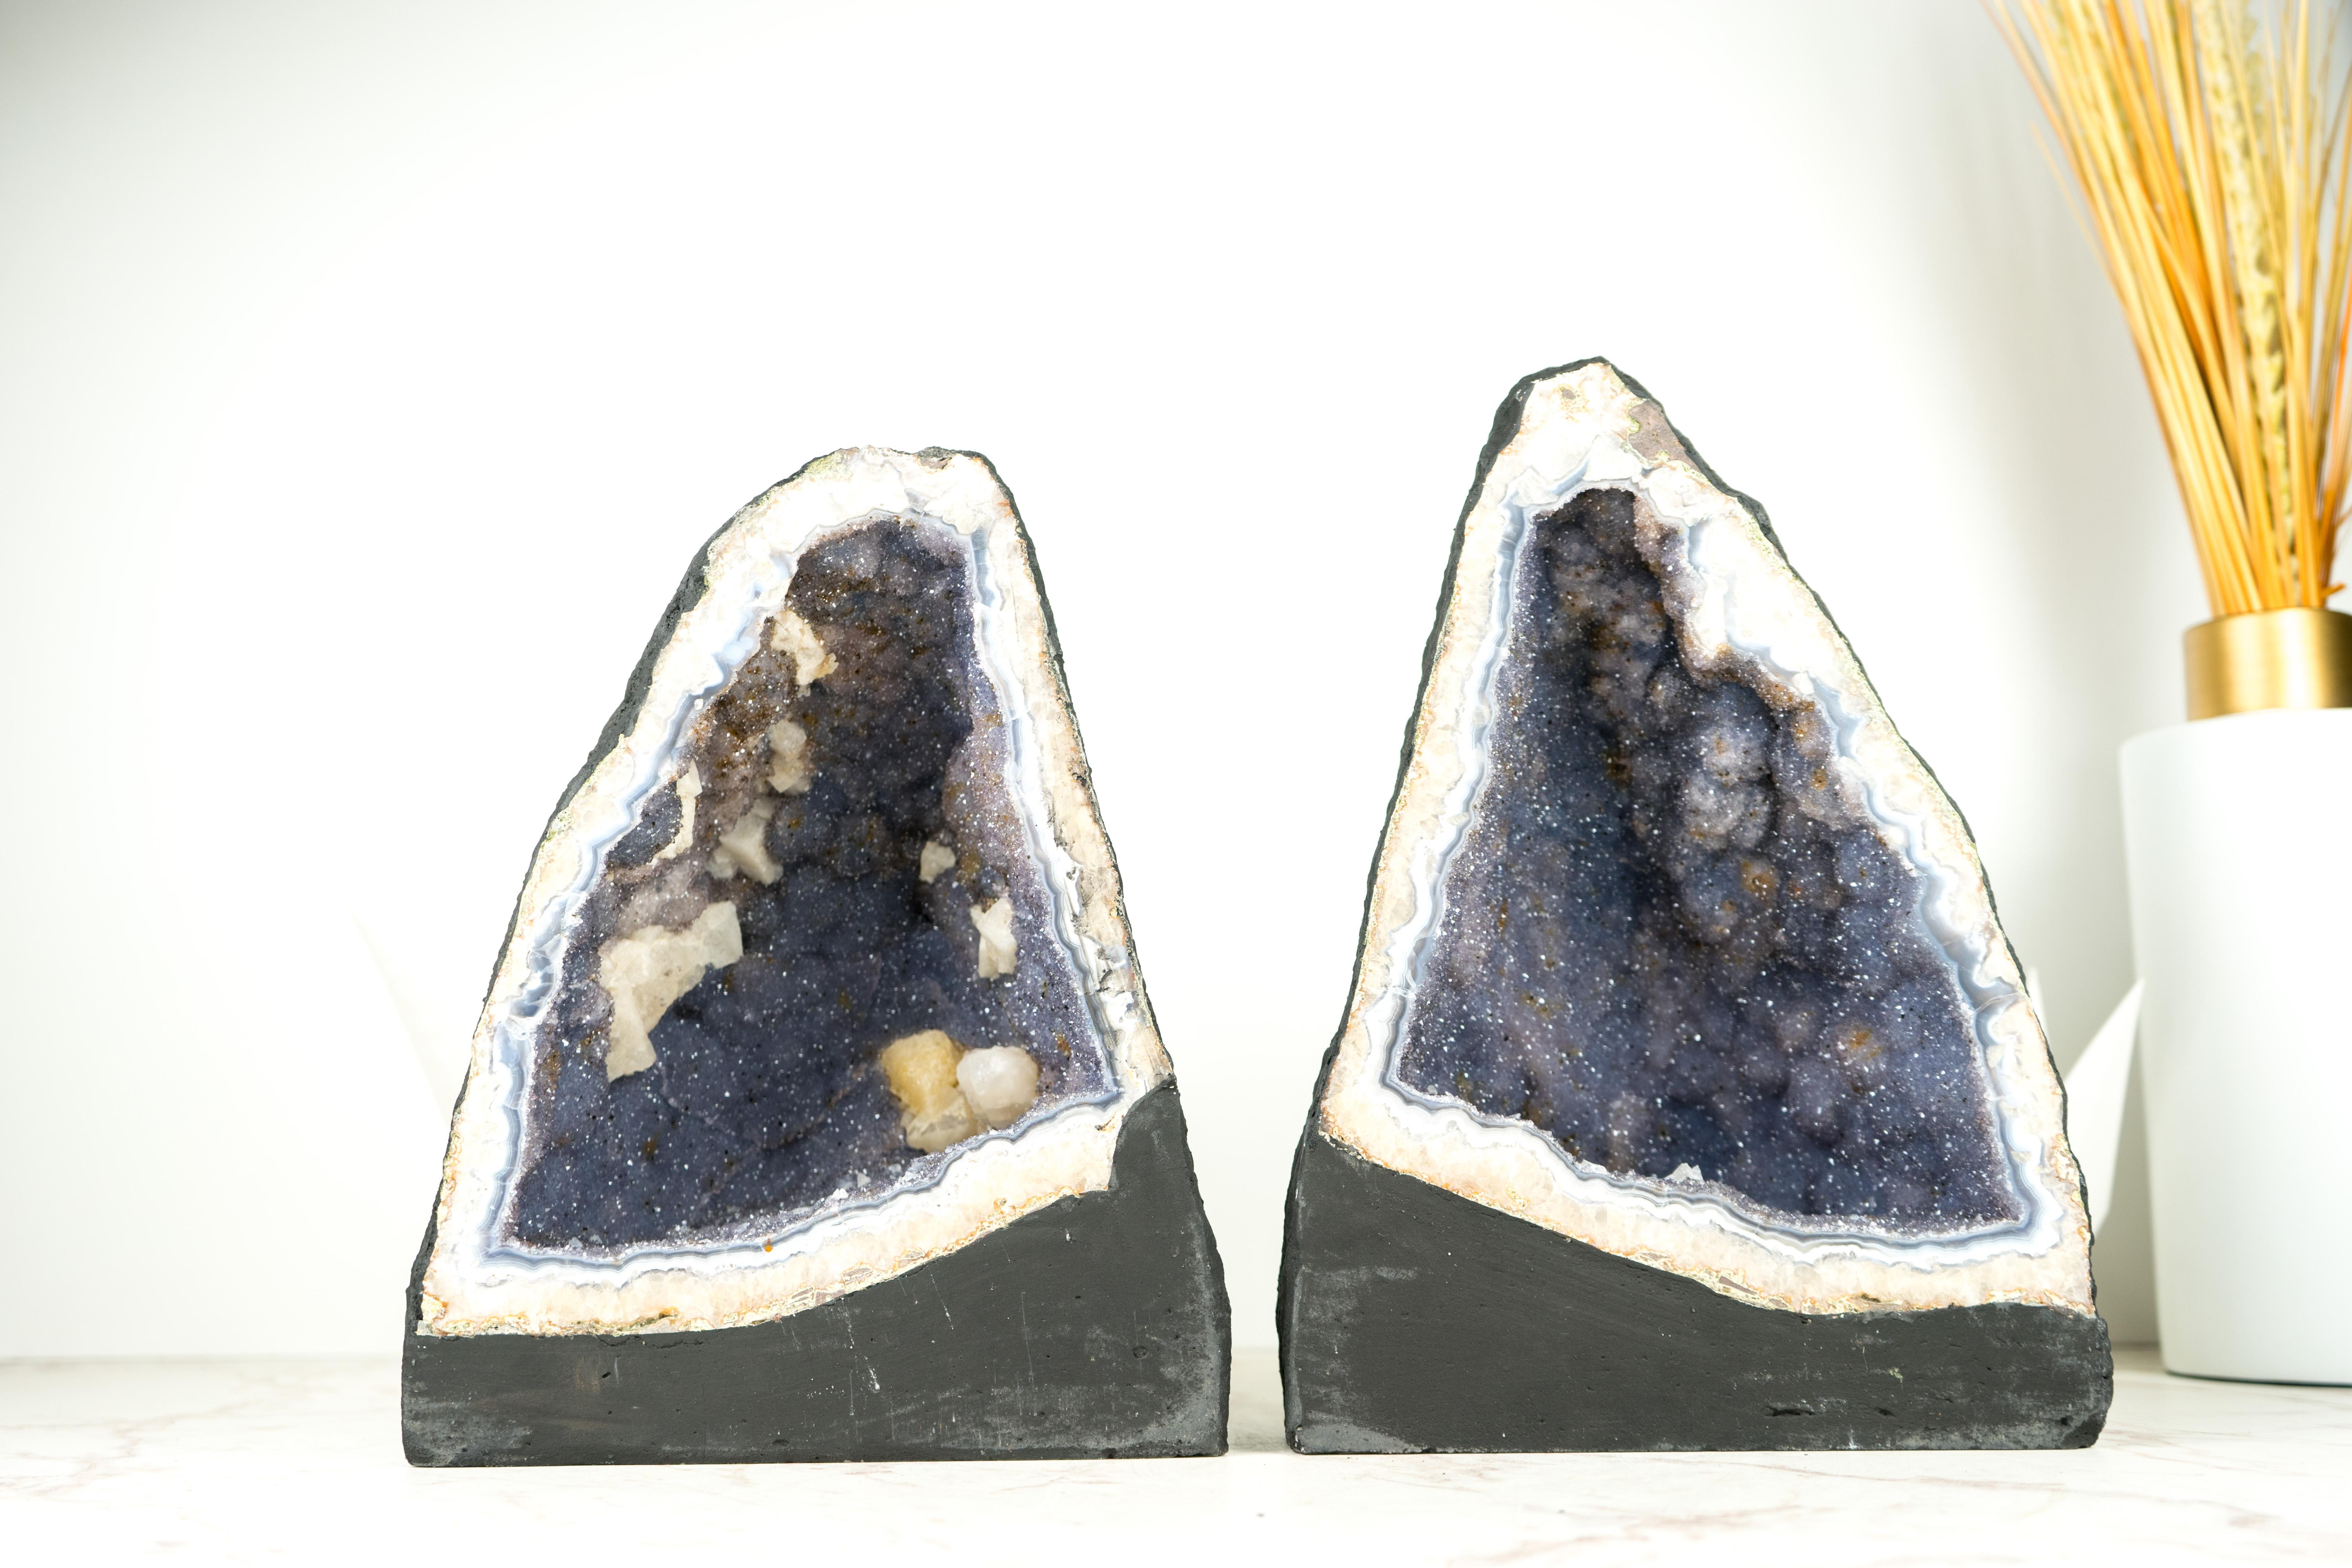 Brazilian Pair of Blue Lace Agate Geodes with Lavender Amethyst Druzy, Rare Sparkly Geodes For Sale